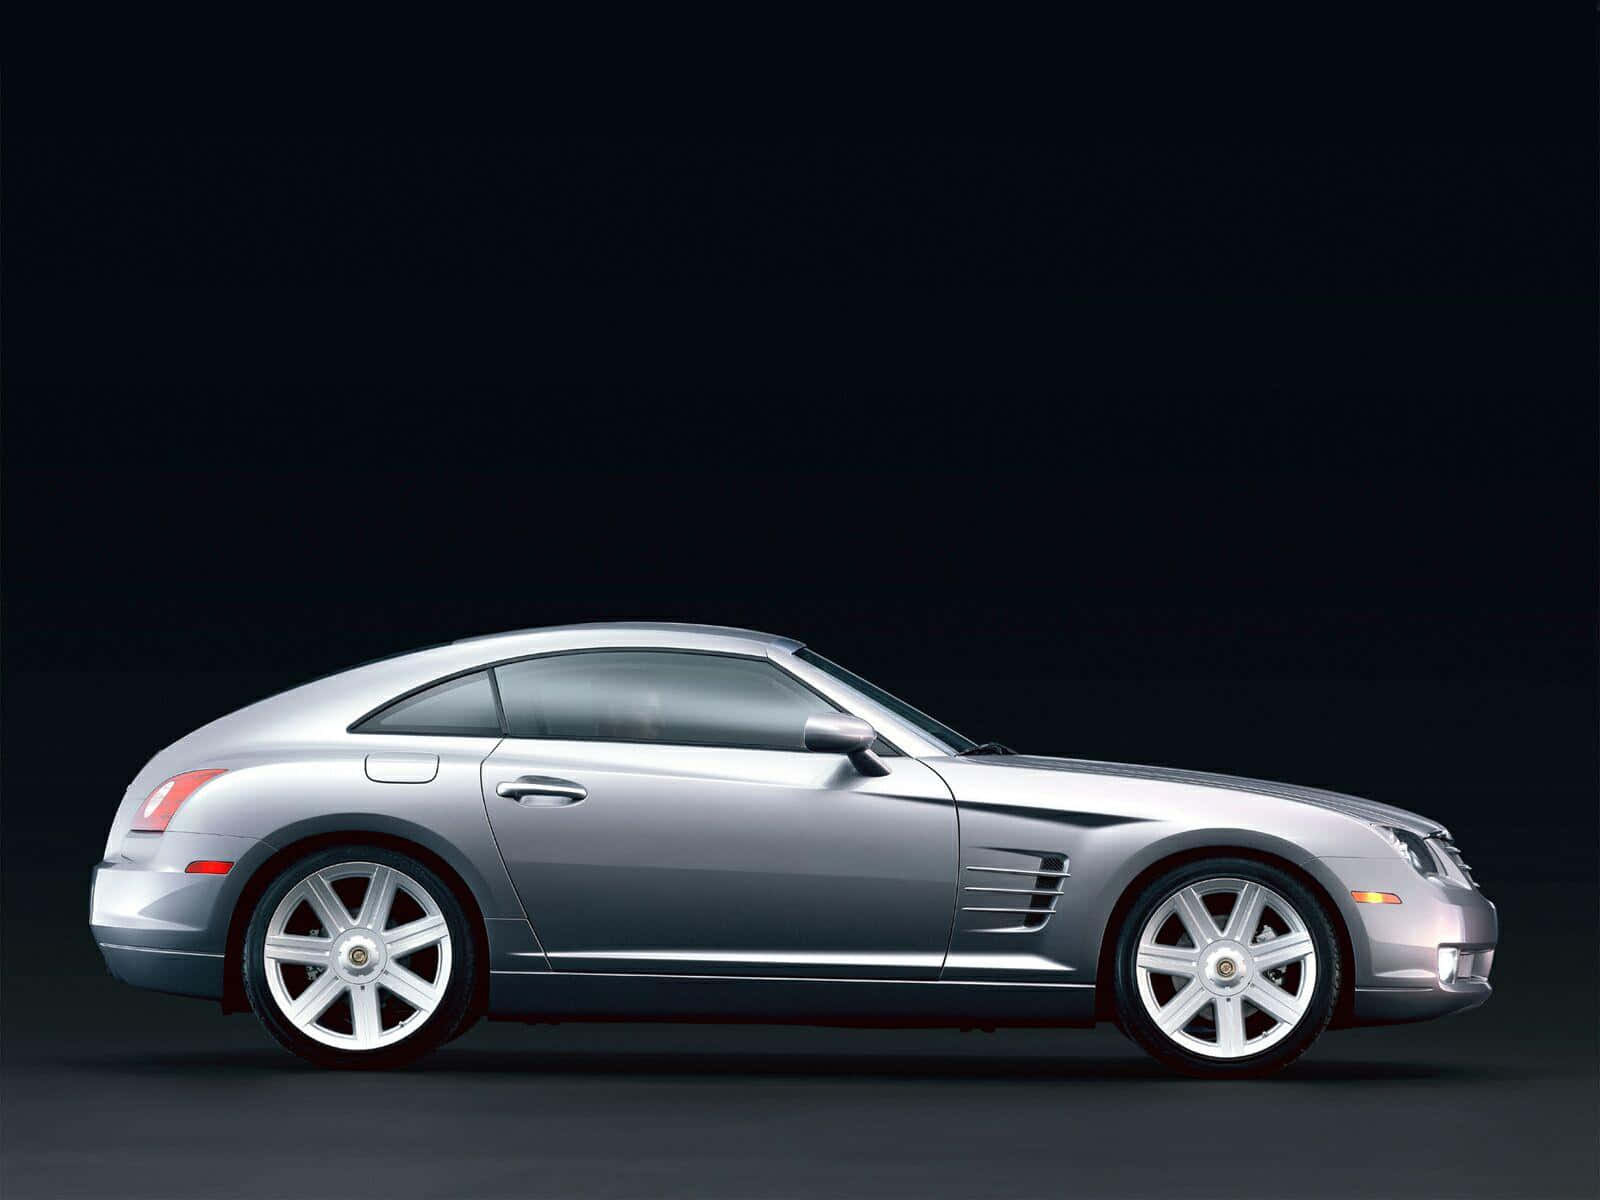 Caption: Stunning Red Chrysler Crossfire on the Road Wallpaper